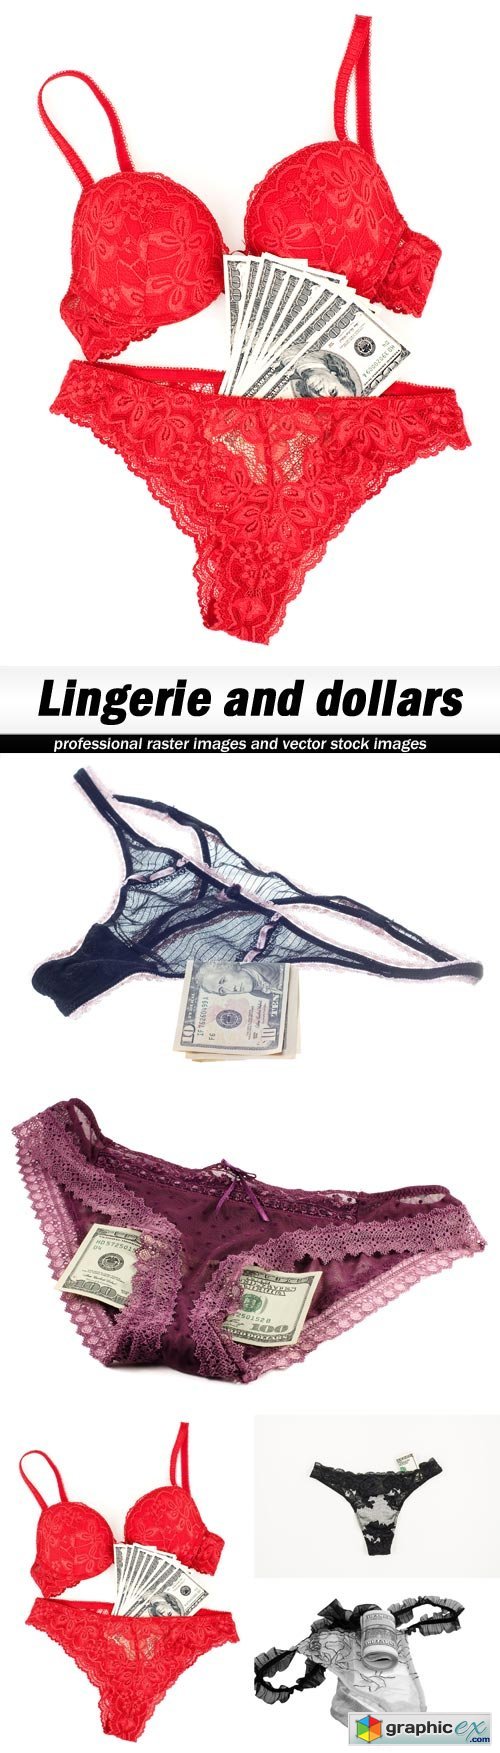 Lingerie and dollars